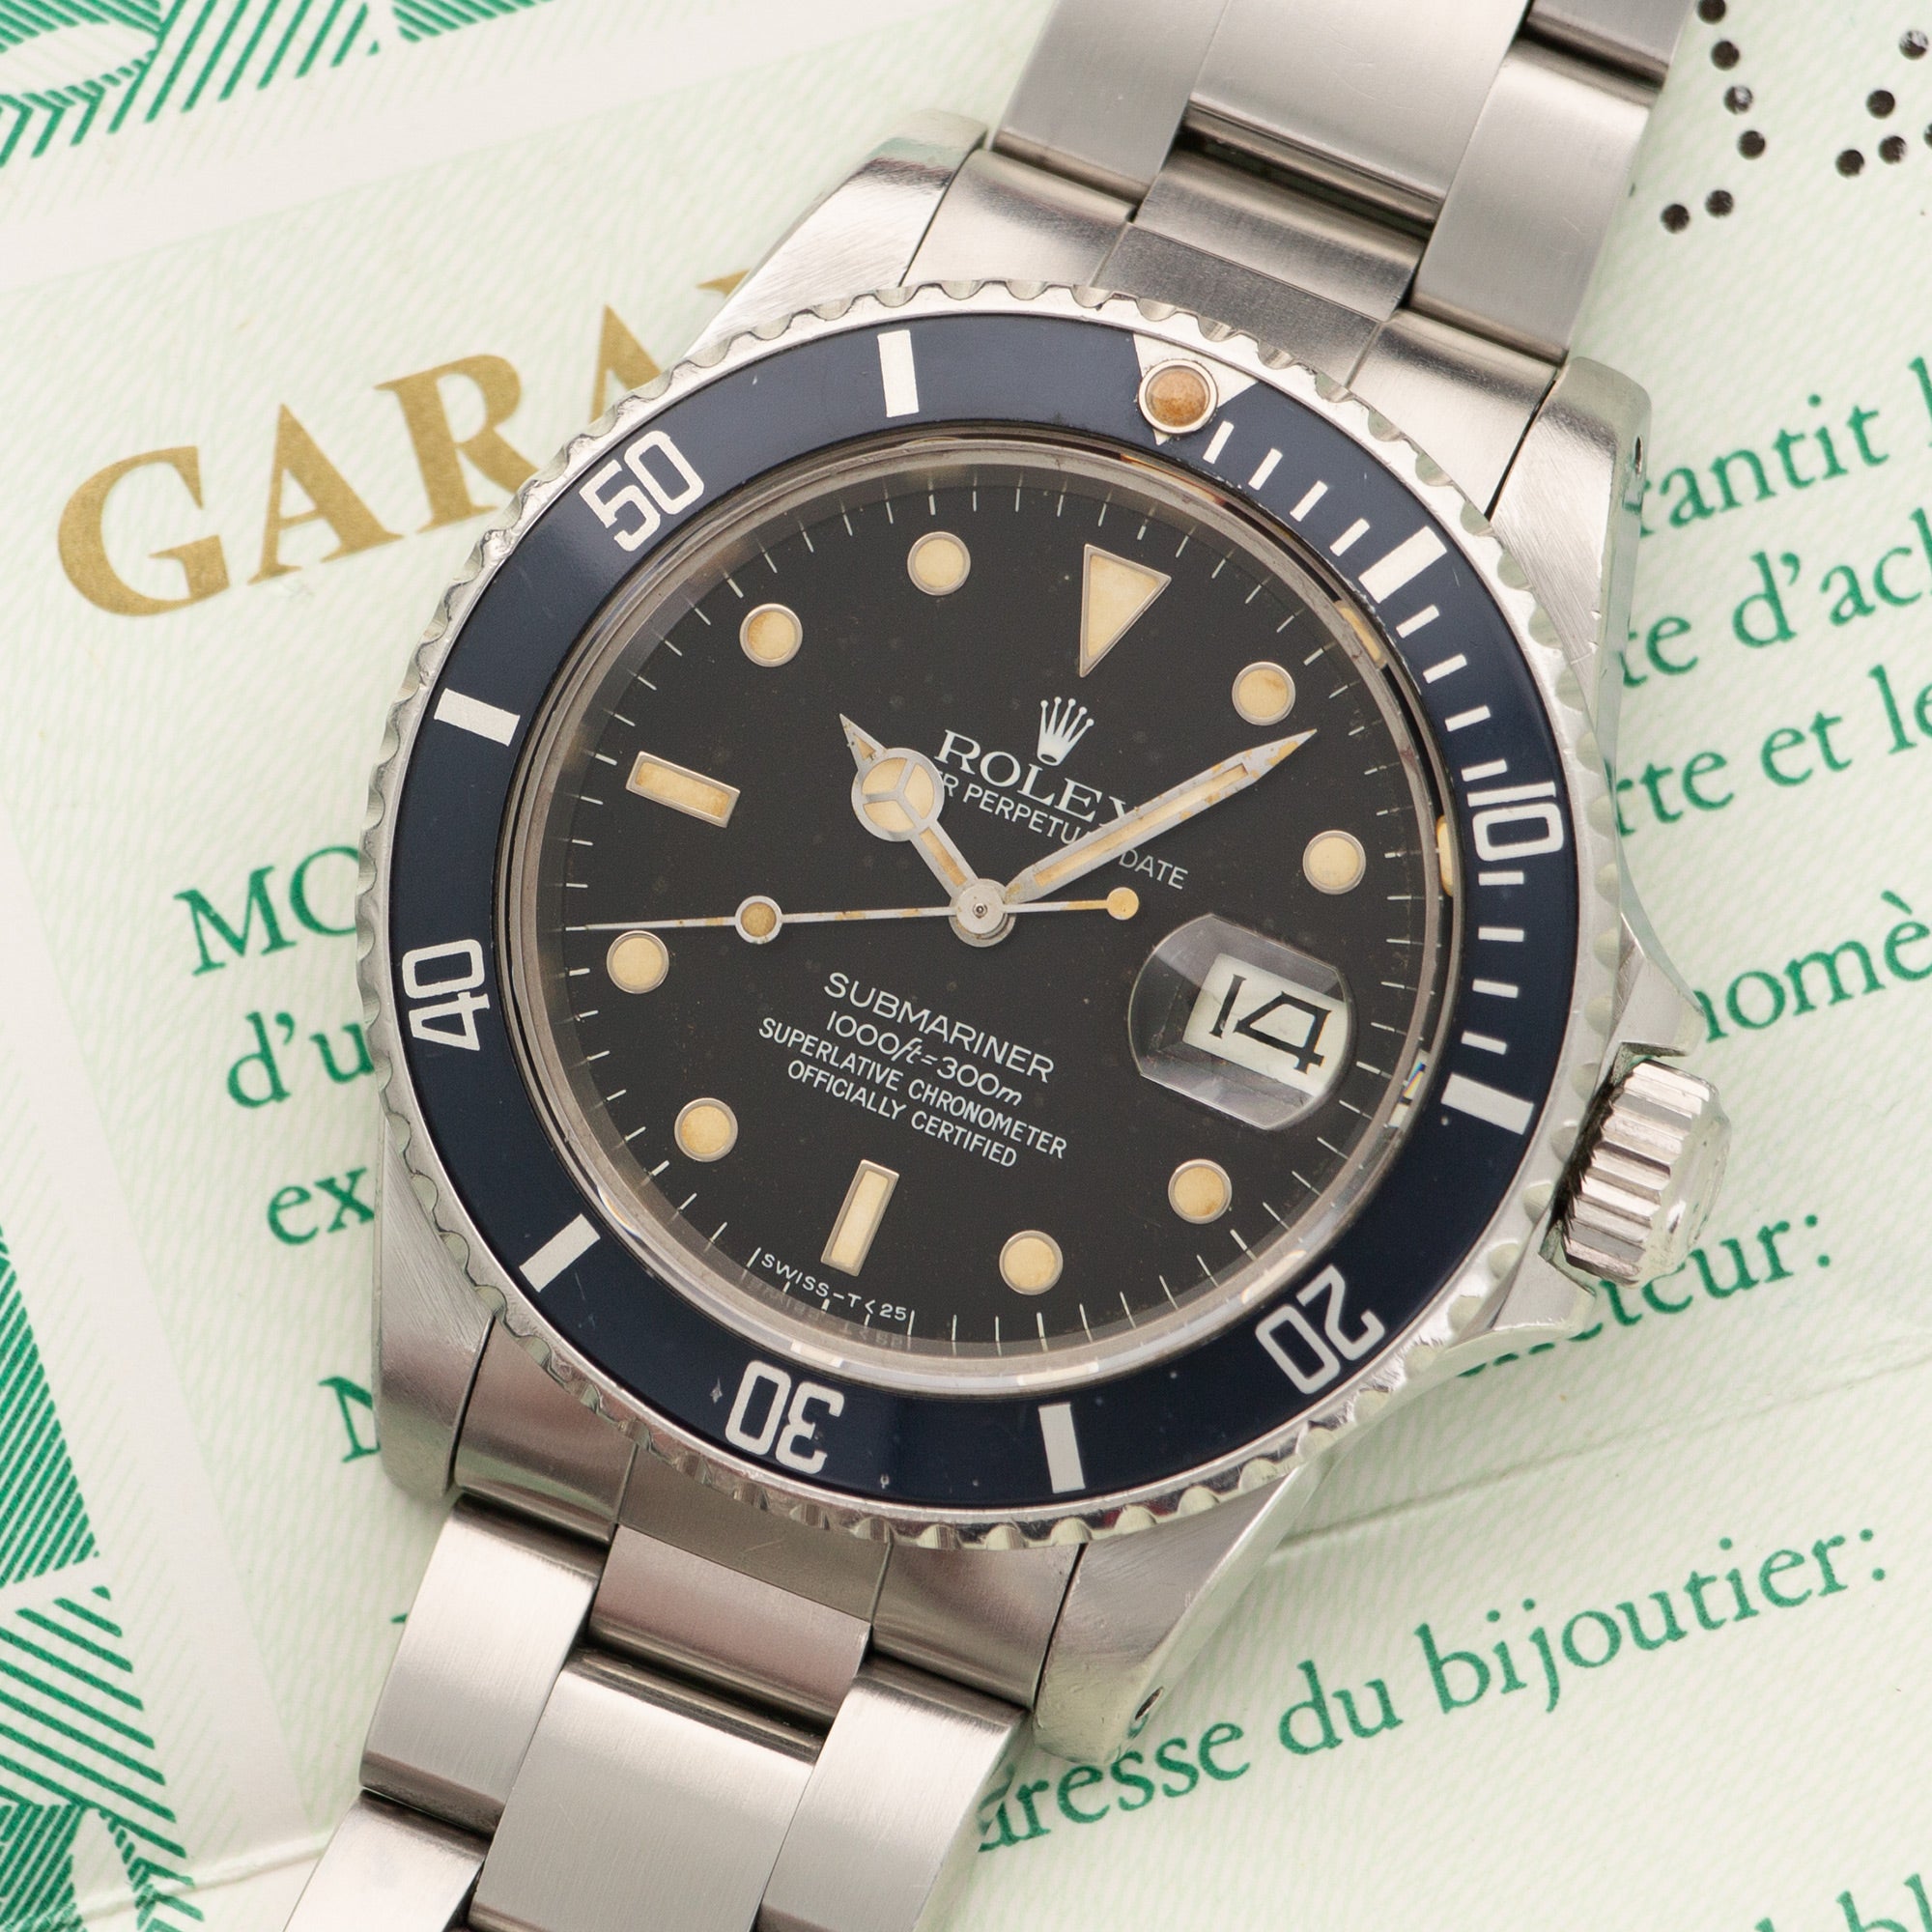 Rolex - Rolex Submariner Watch Ref. 16800 with Original Box and Papers - The Keystone Watches